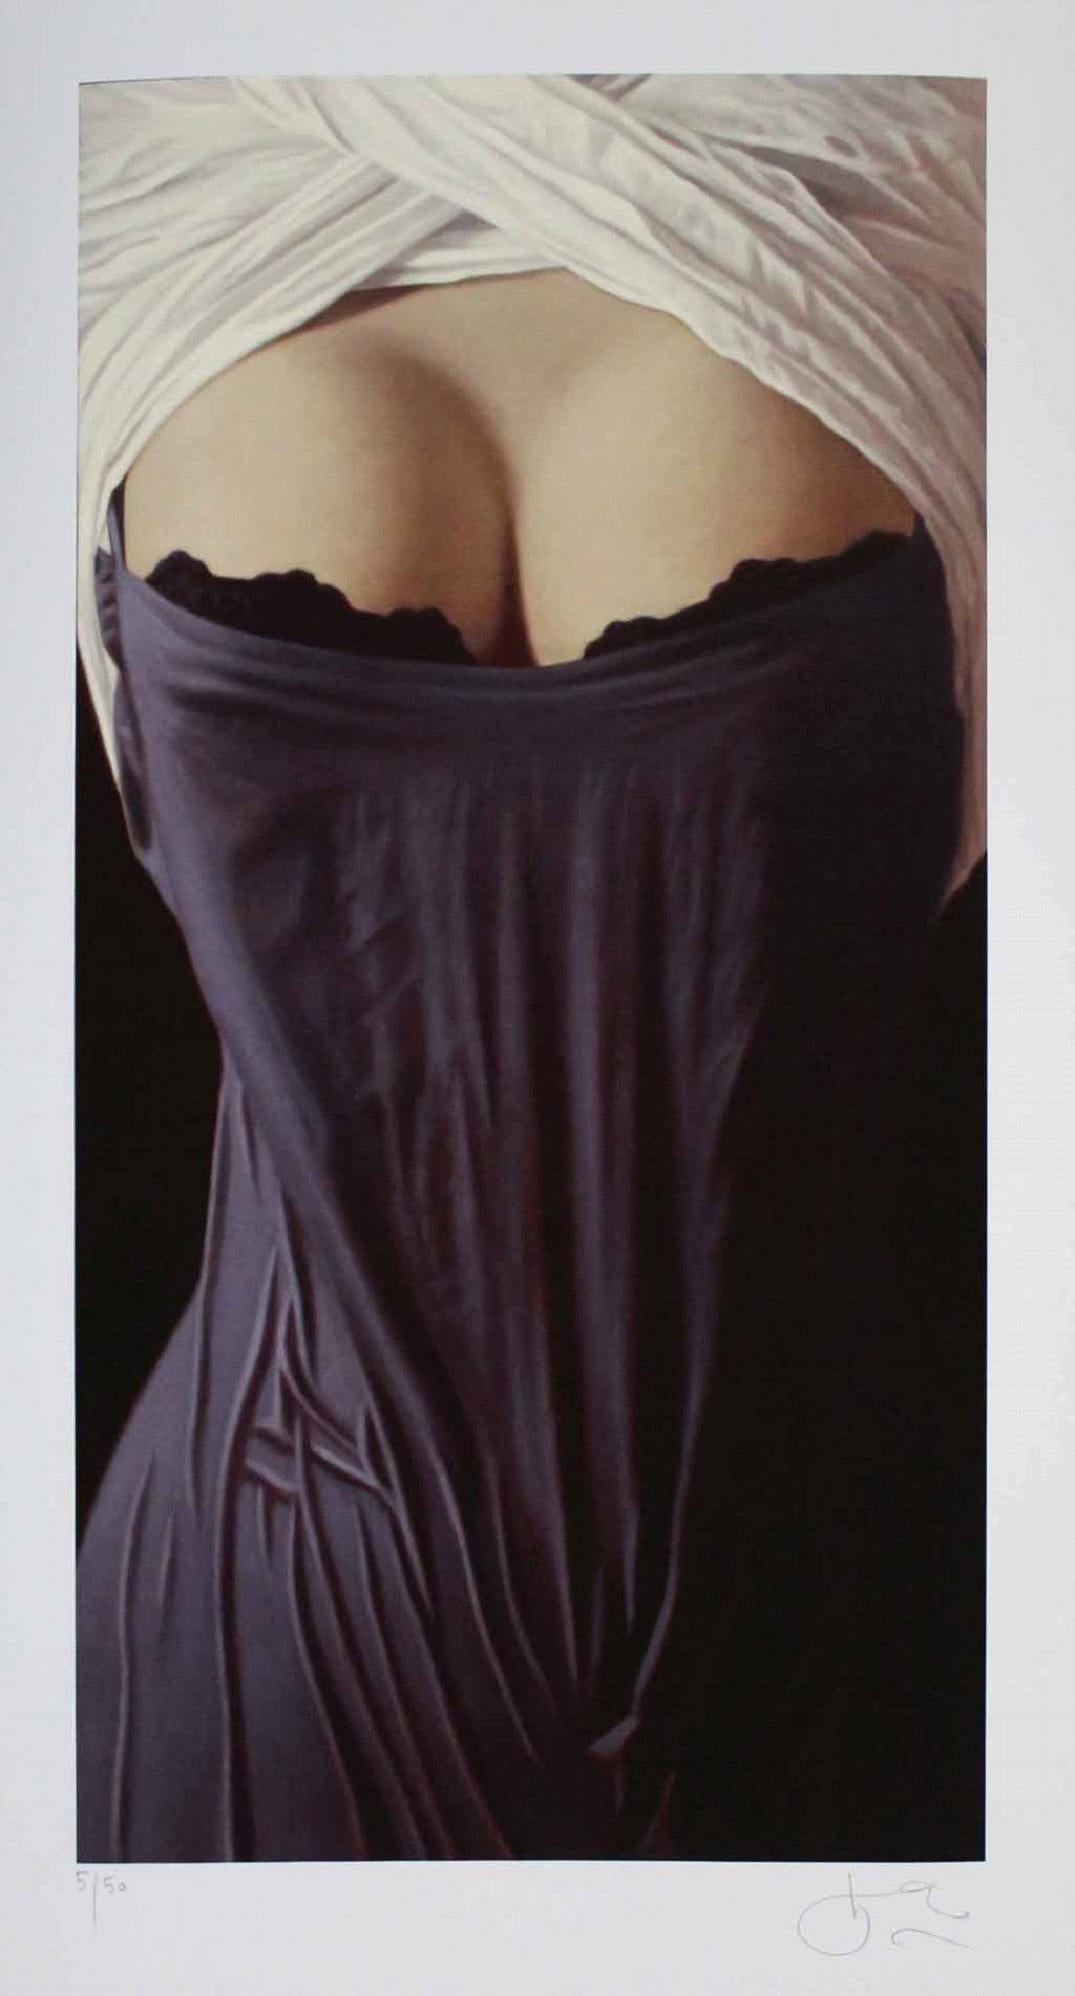 Willi Kissmer - "Gray and White" - giclée print - signed/numbered - edition: 50